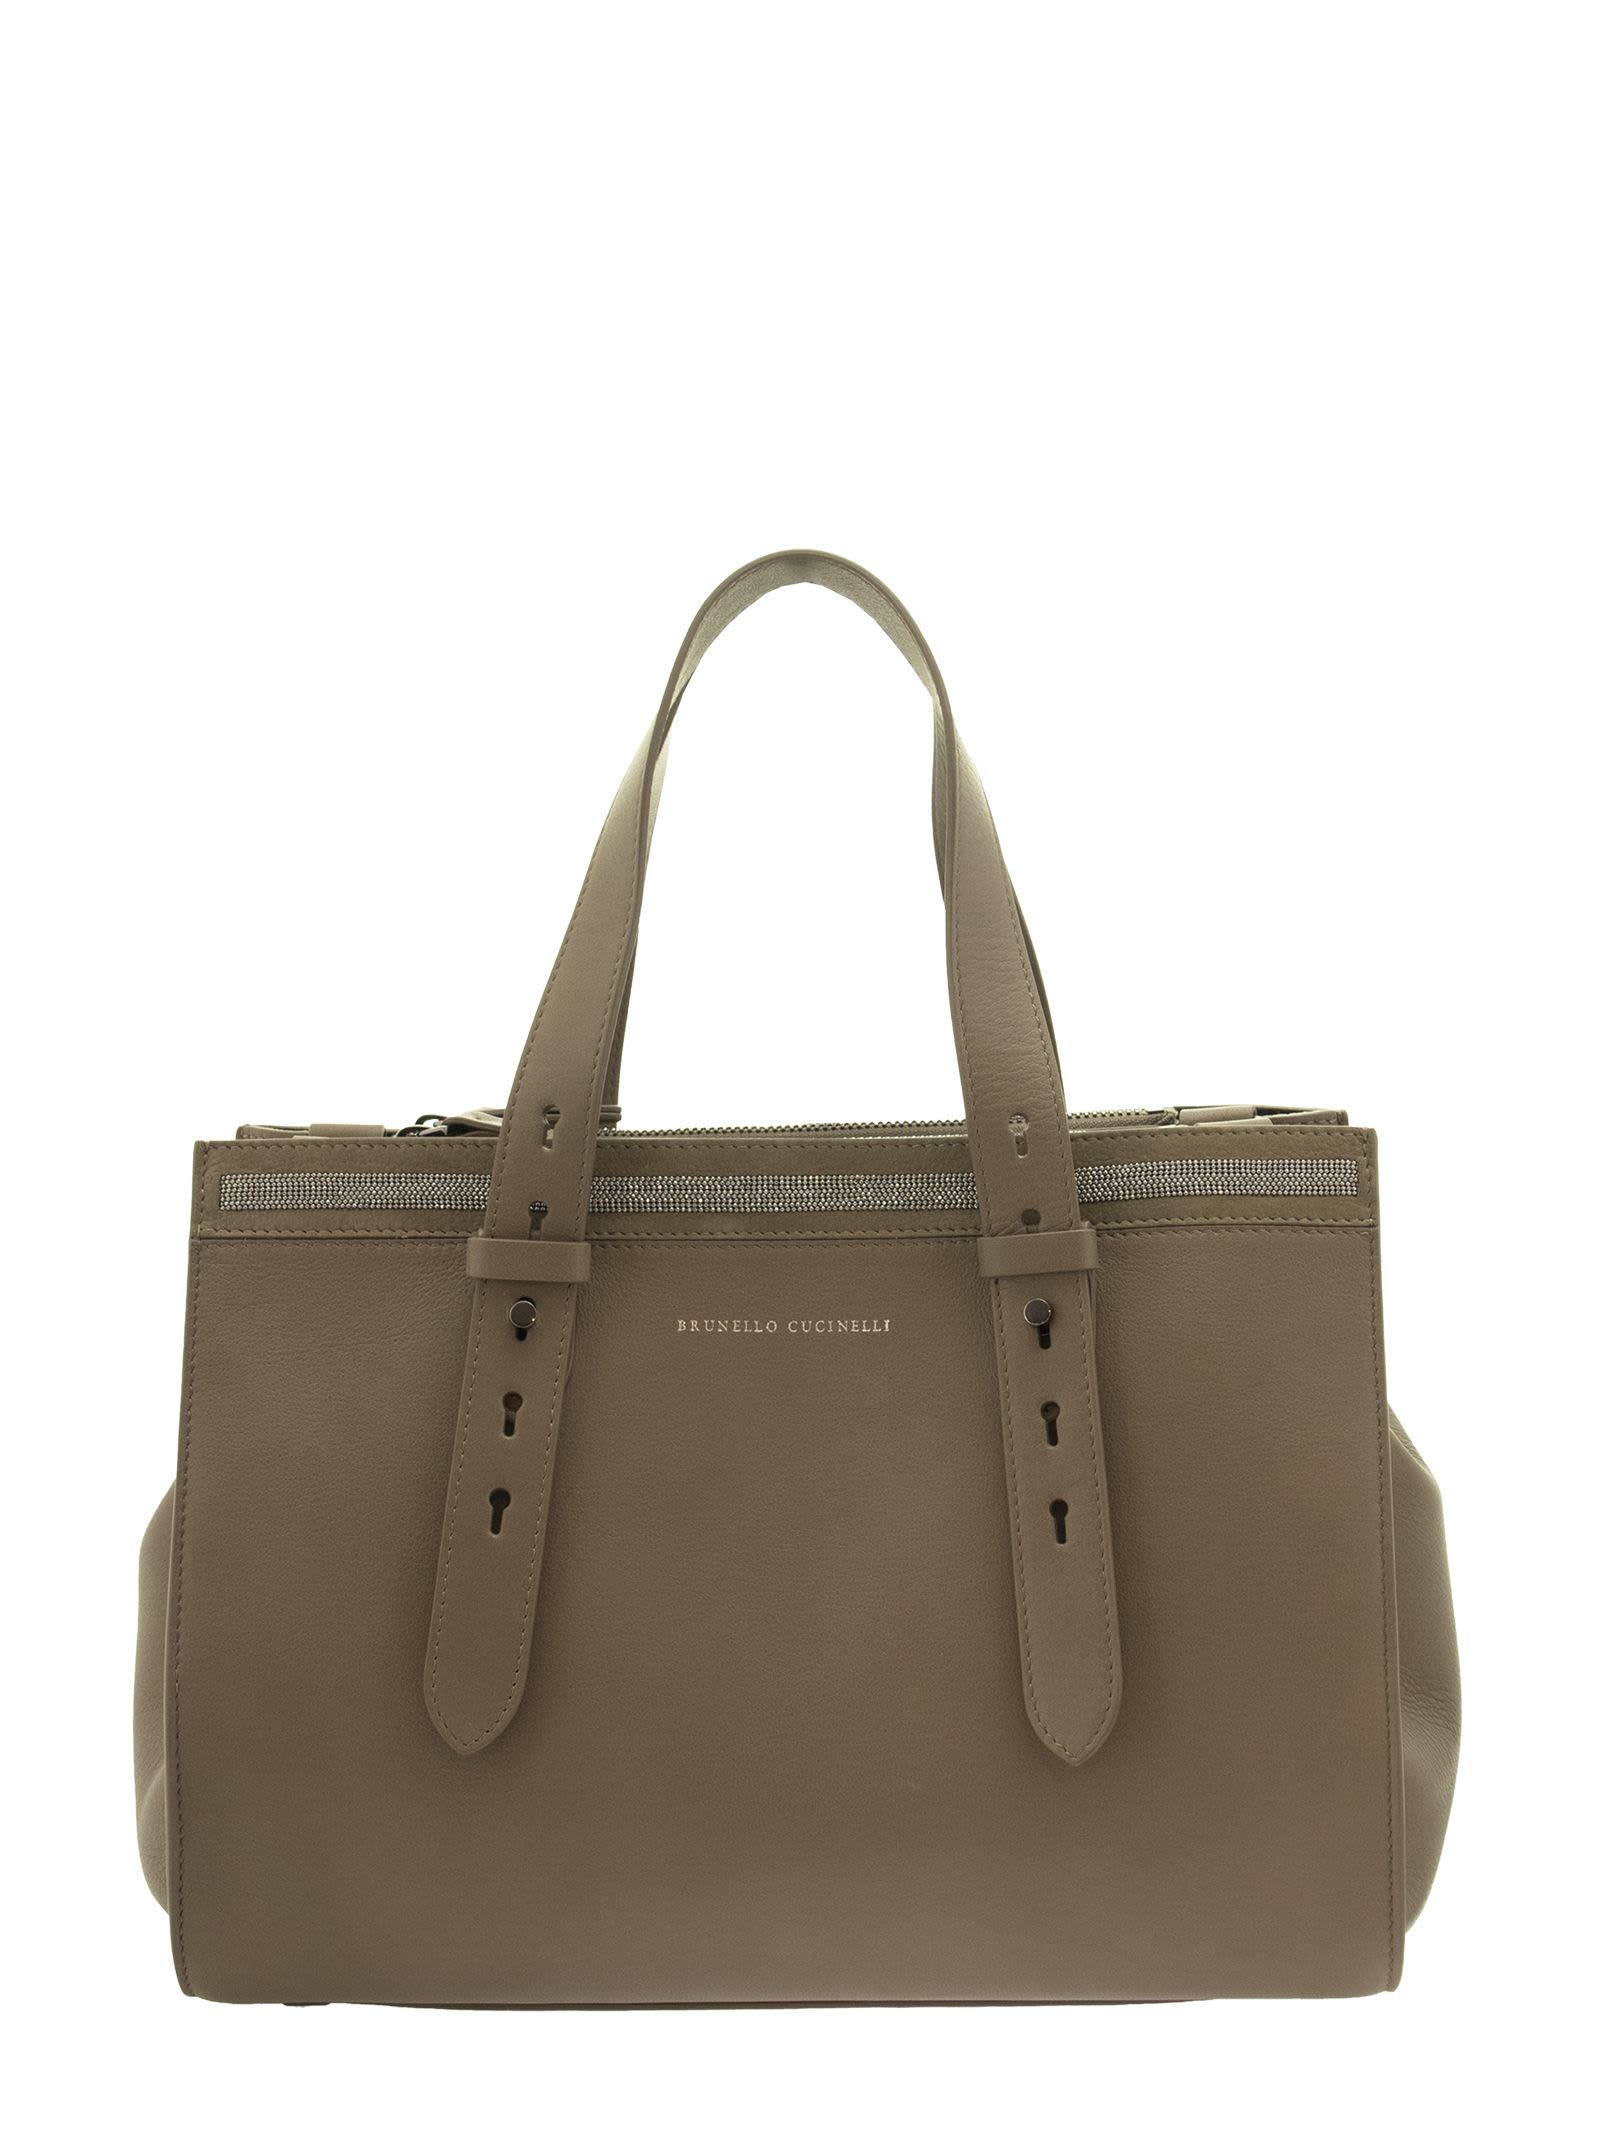 Brunello Cucinelli Polished Calfskin Bag With Precious Band